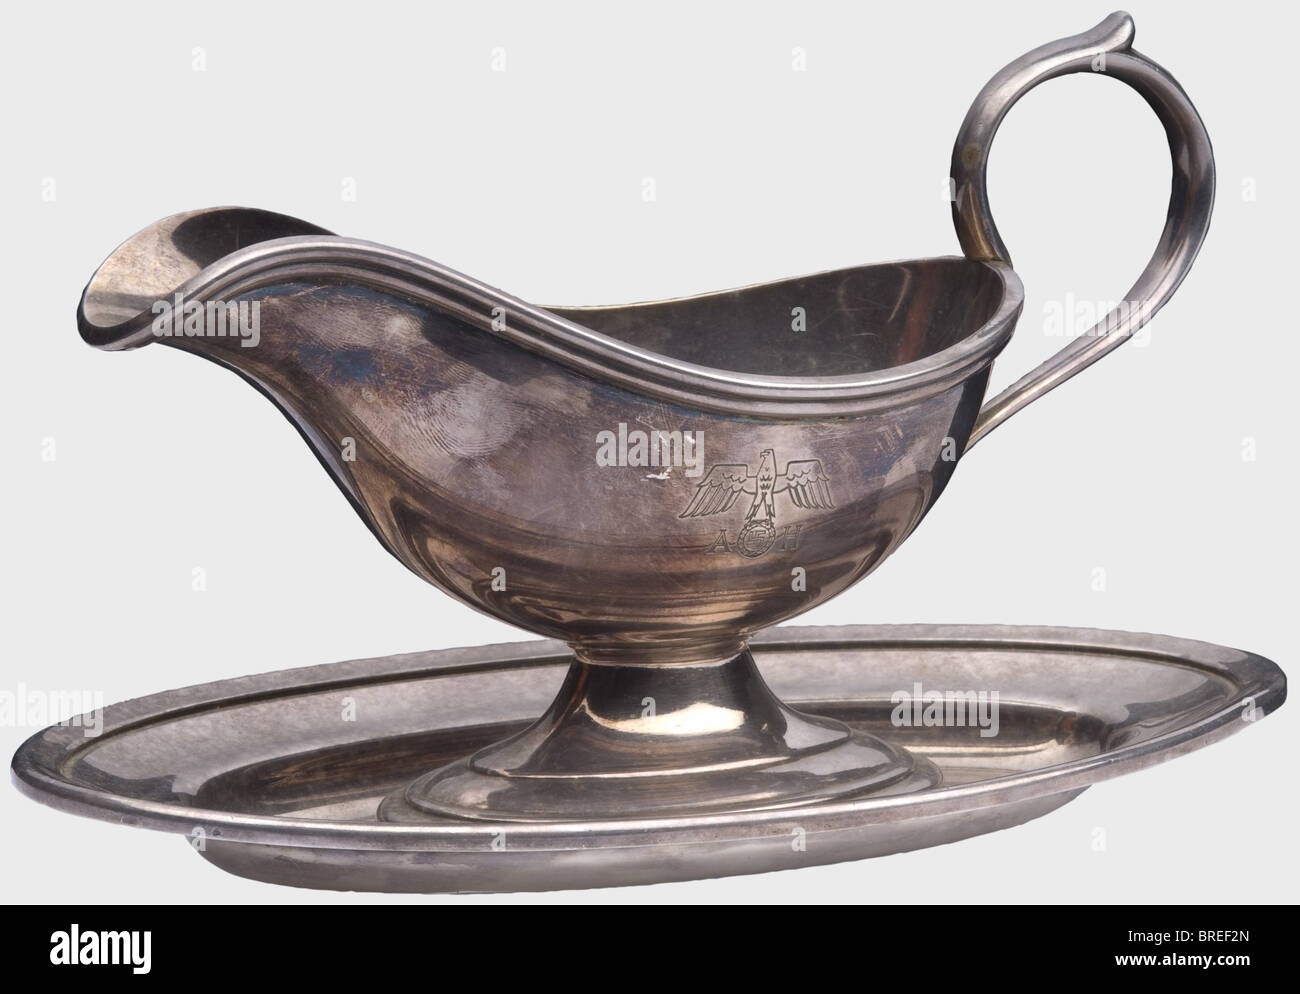 Adolf Hitler, a sauce boat from his personal table silver Hard silver plating, one-piece version (screwed together) with a national eagle engraved on one side above the letters 'AH'. Marked, 'Wellner - 30 cl - 25' on the bottom. Width ca. 24 cm. Height ca. 14 cm. historic, historical, 1930s, 1930s, 20th century, NS, National Socialism, Nazism, Third Reich, German Reich, Germany, German, National Socialist, Nazi, Nazi period, fascism, vessel, vessels, object, objects, stills, clipping, clippings, cut out, cut-out, cut-outs, Stock Photo